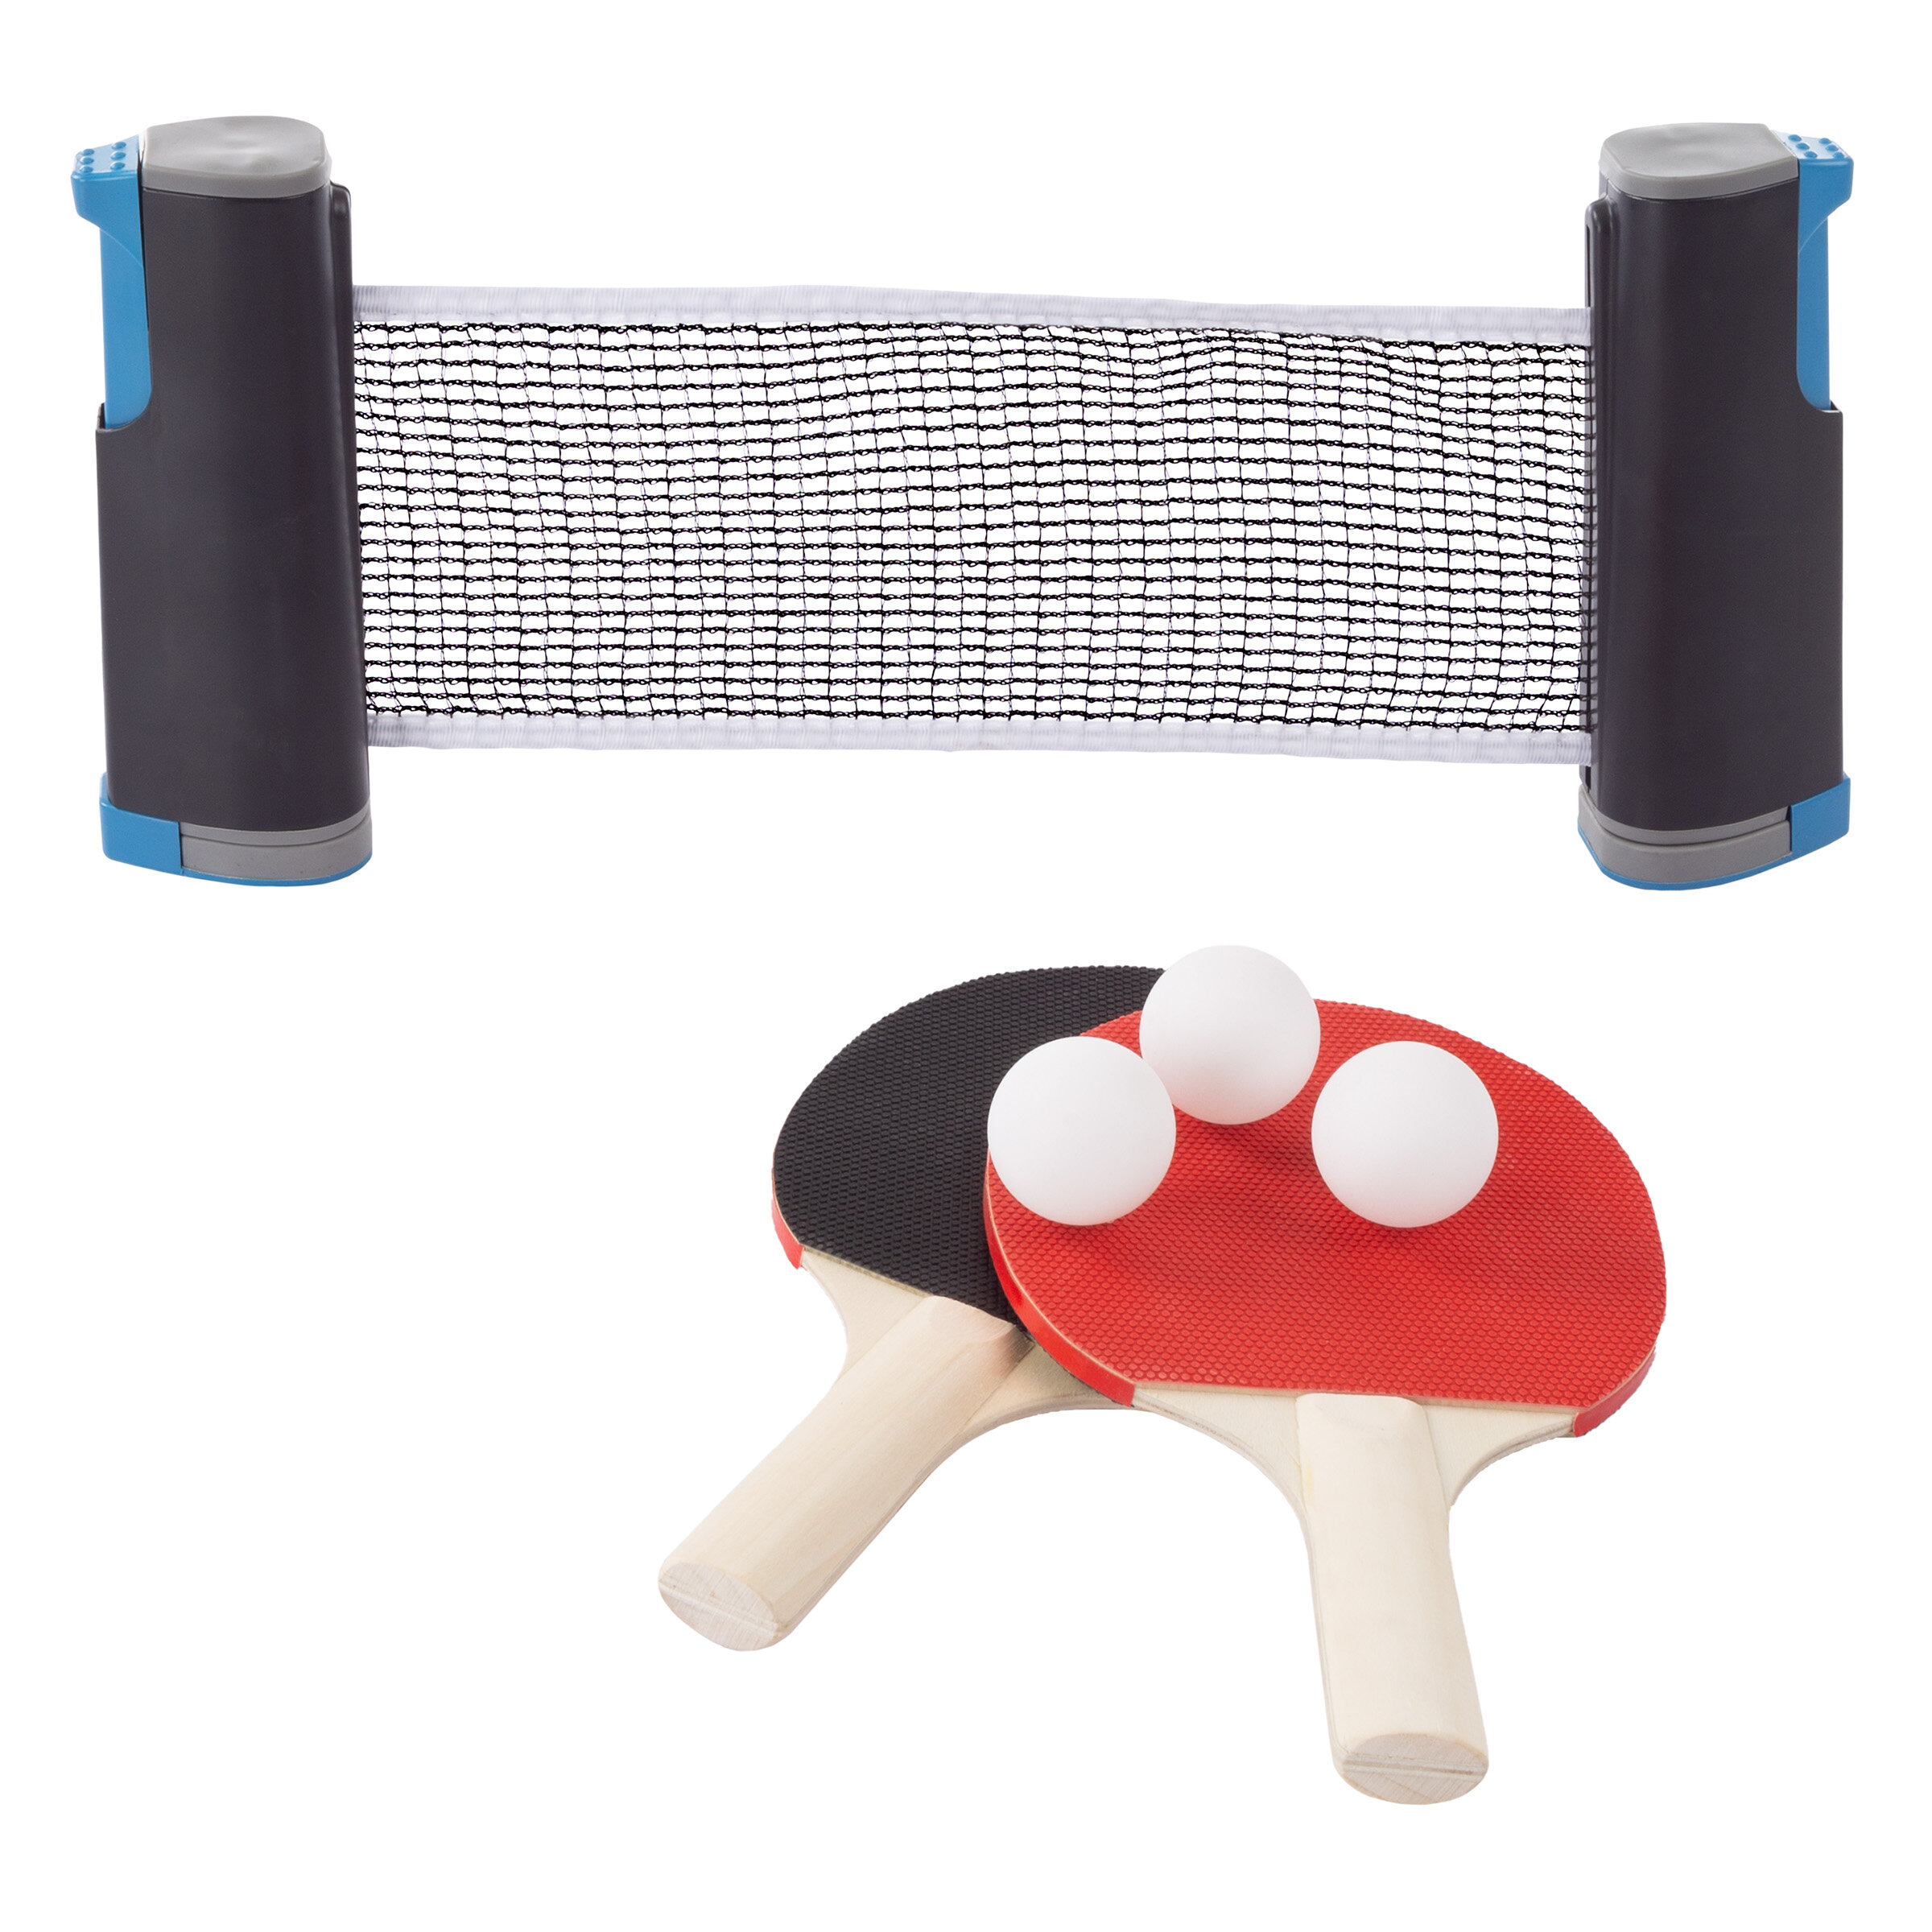 Easy to Install Table Tennis Training Game Practical Pingpong Training Toy with Rackets Table Tennis Trainer for Indoor Outdoor A/r Table Tennis Toy Set 